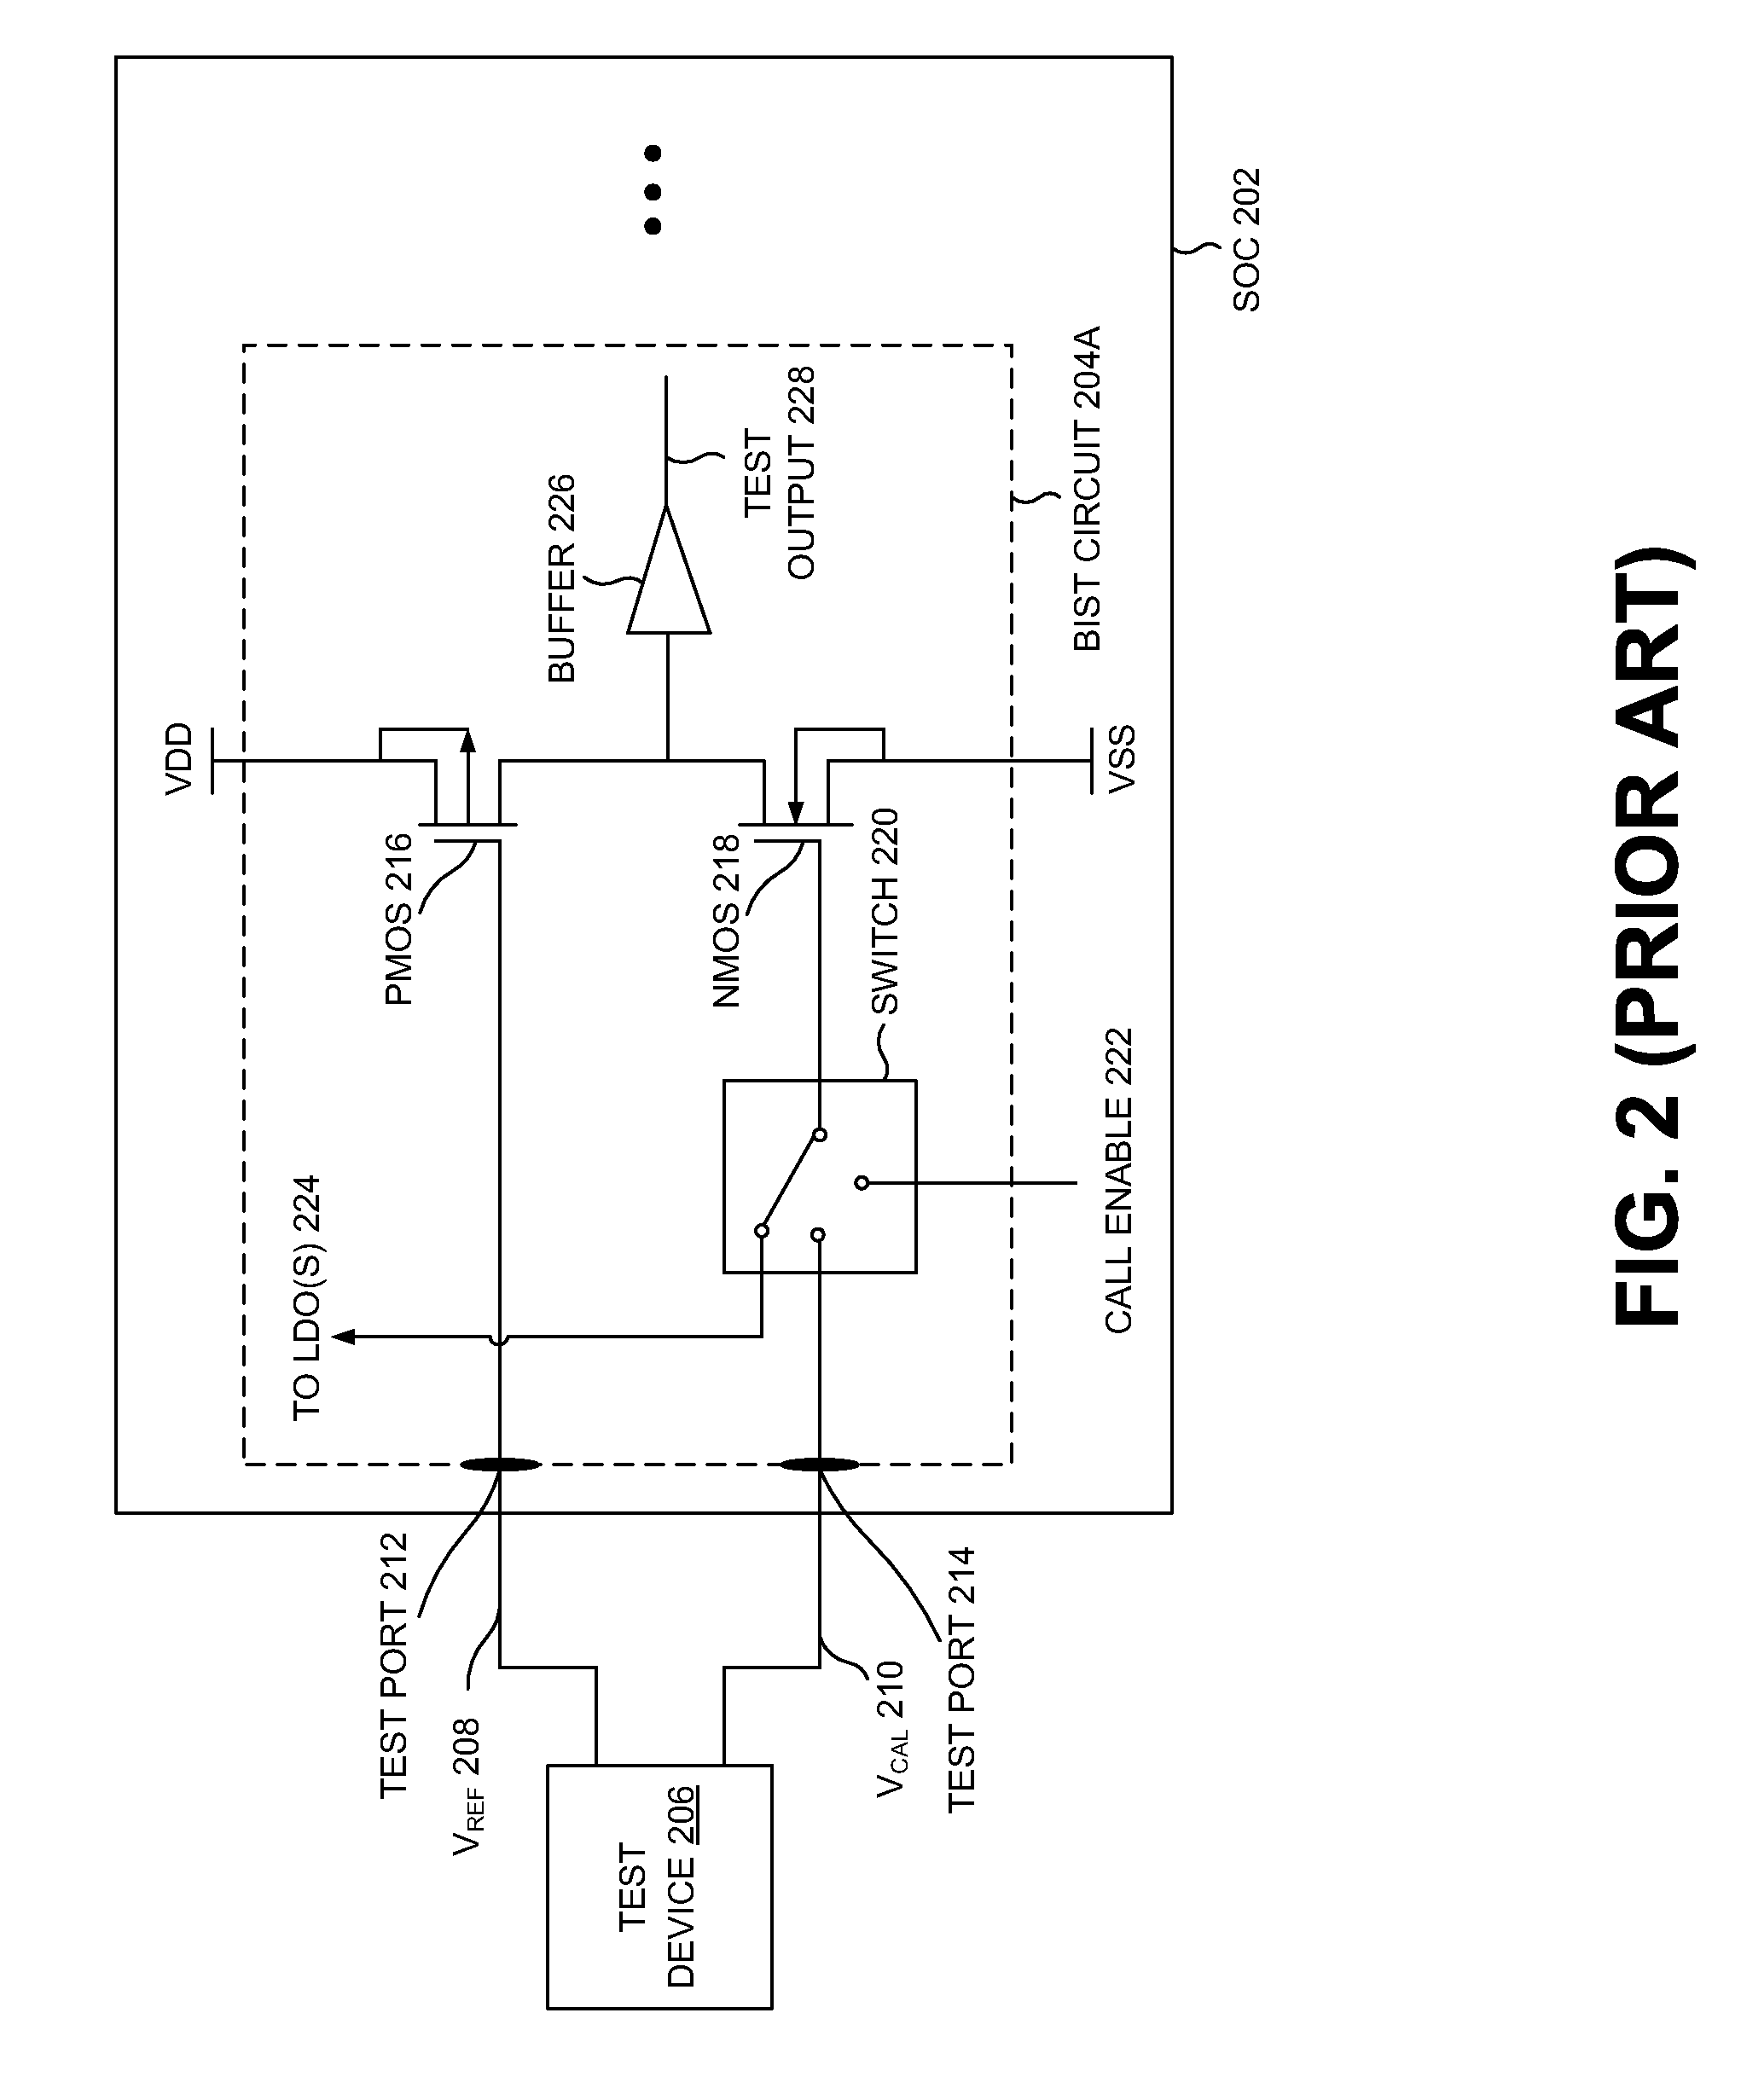 Low dropout regulator testing system and device